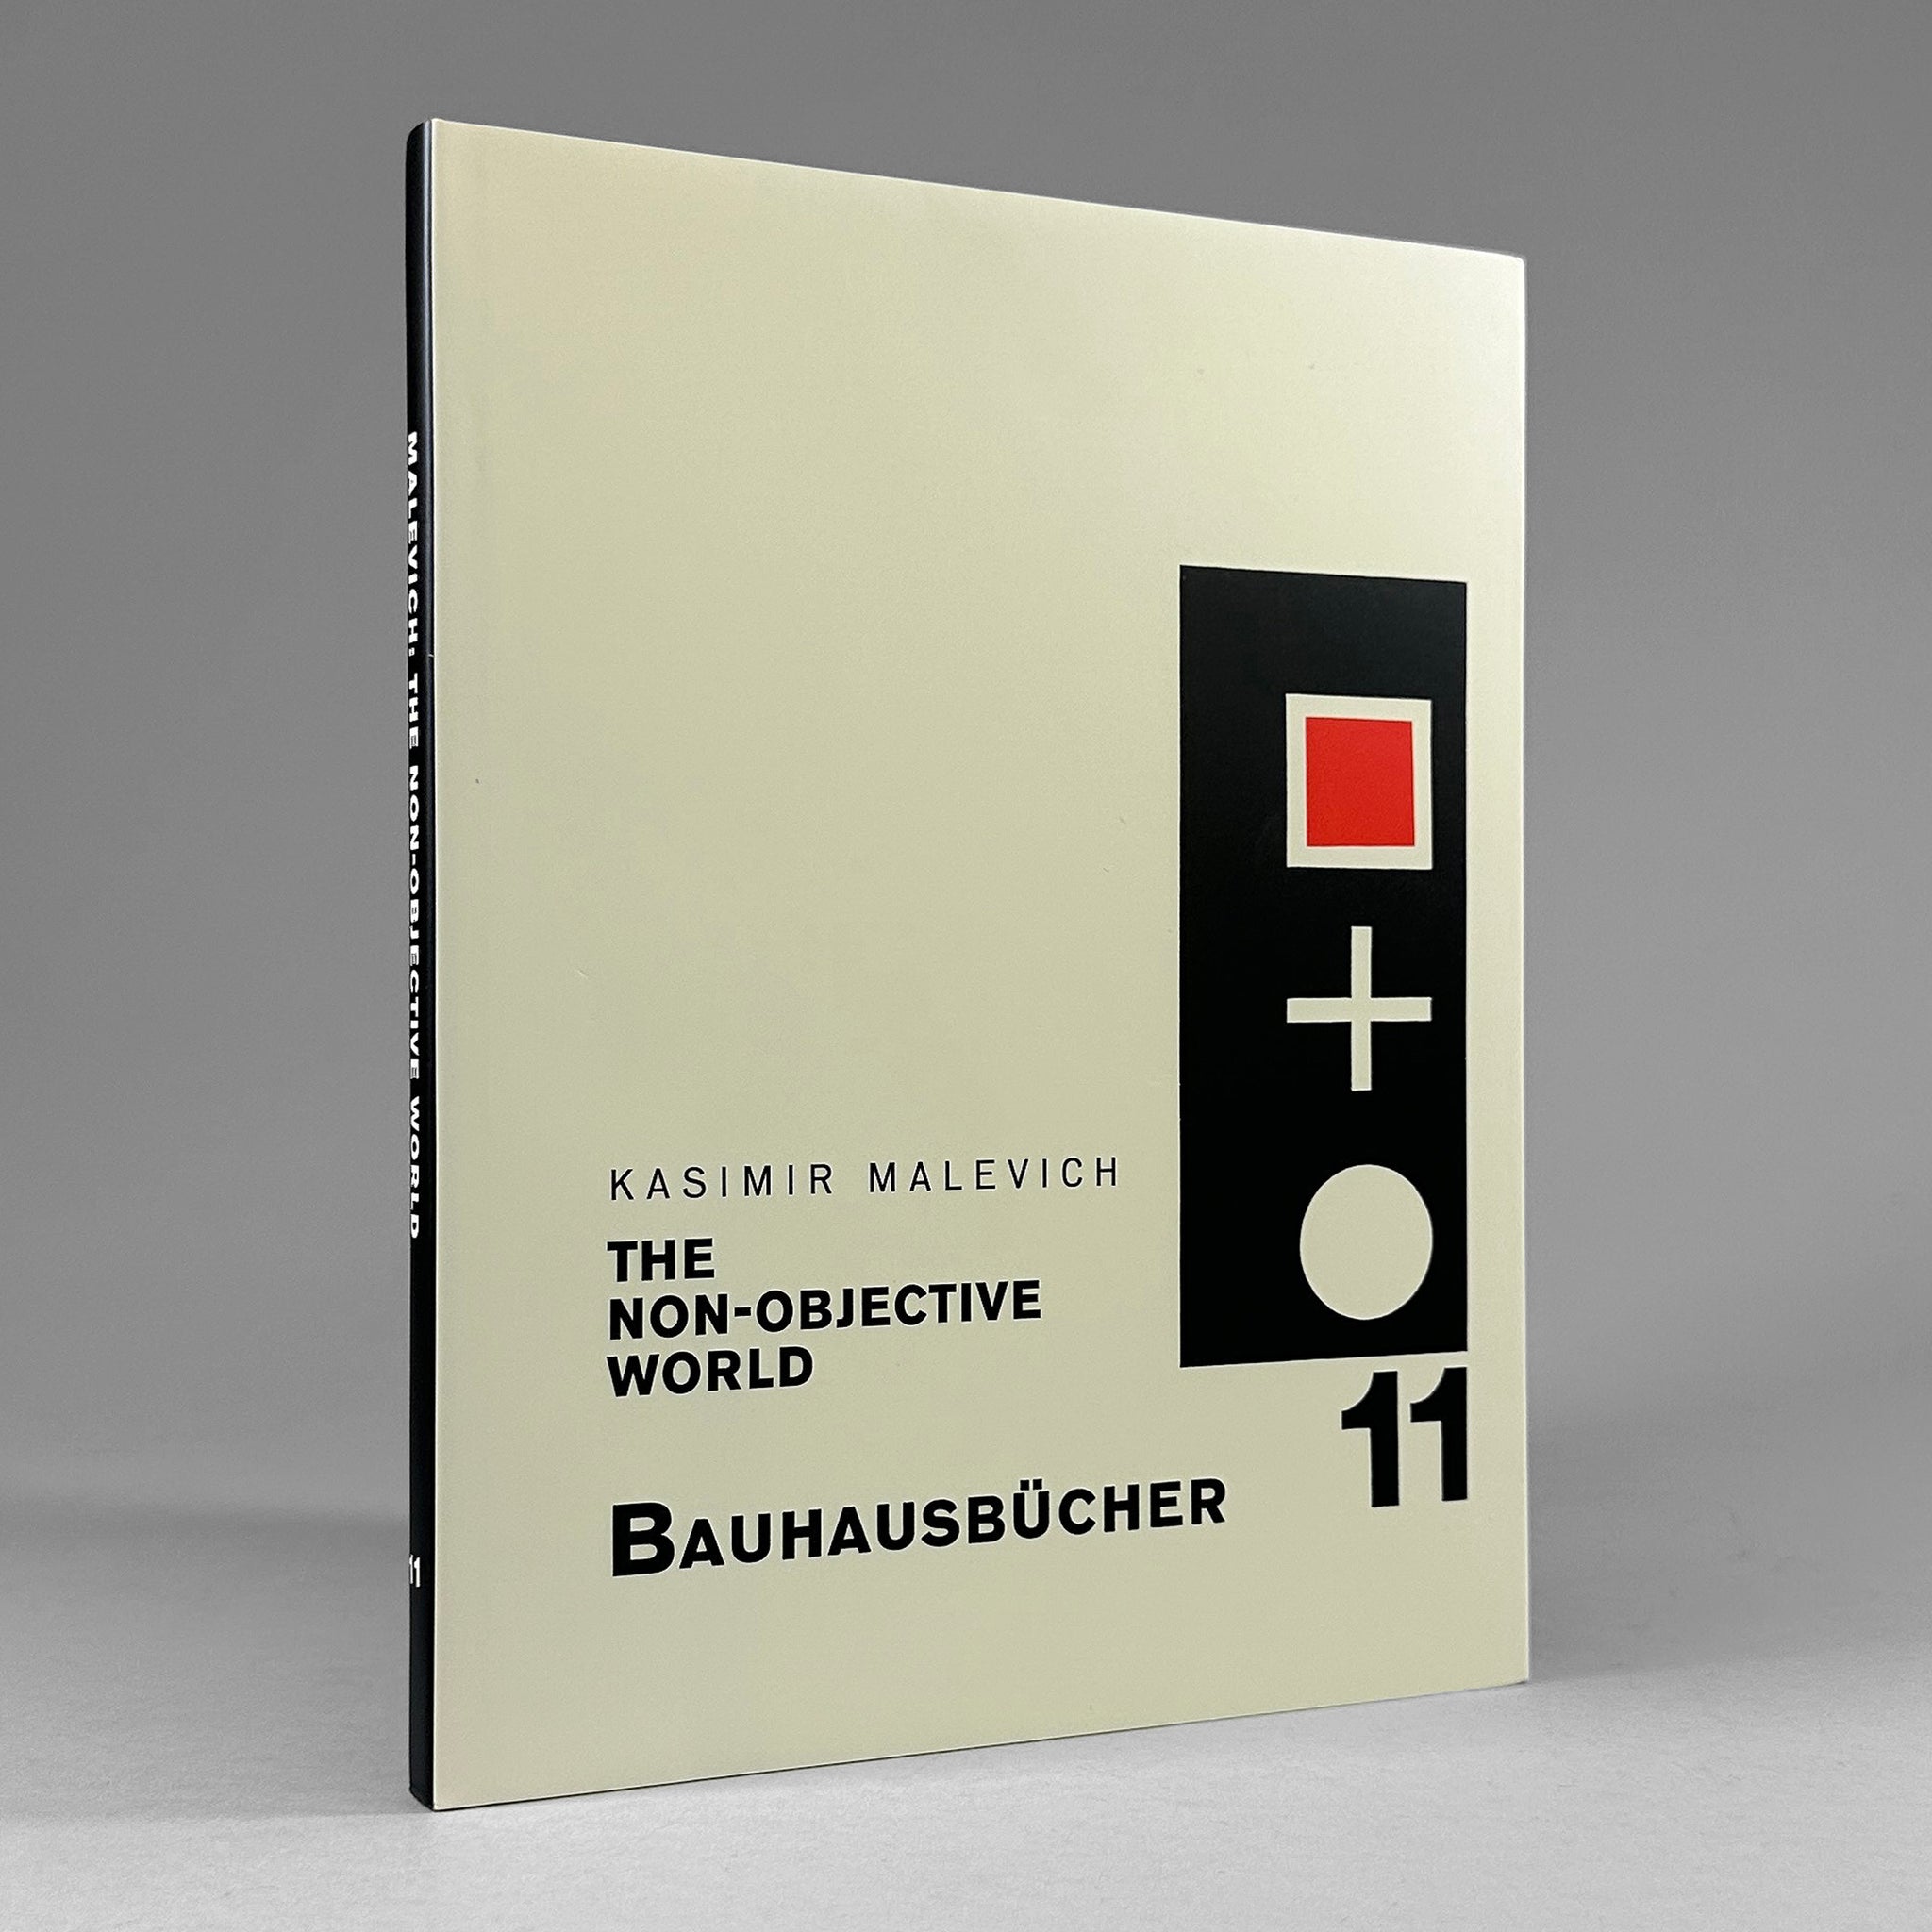 Kasimir Malevich: The Non-Objective World